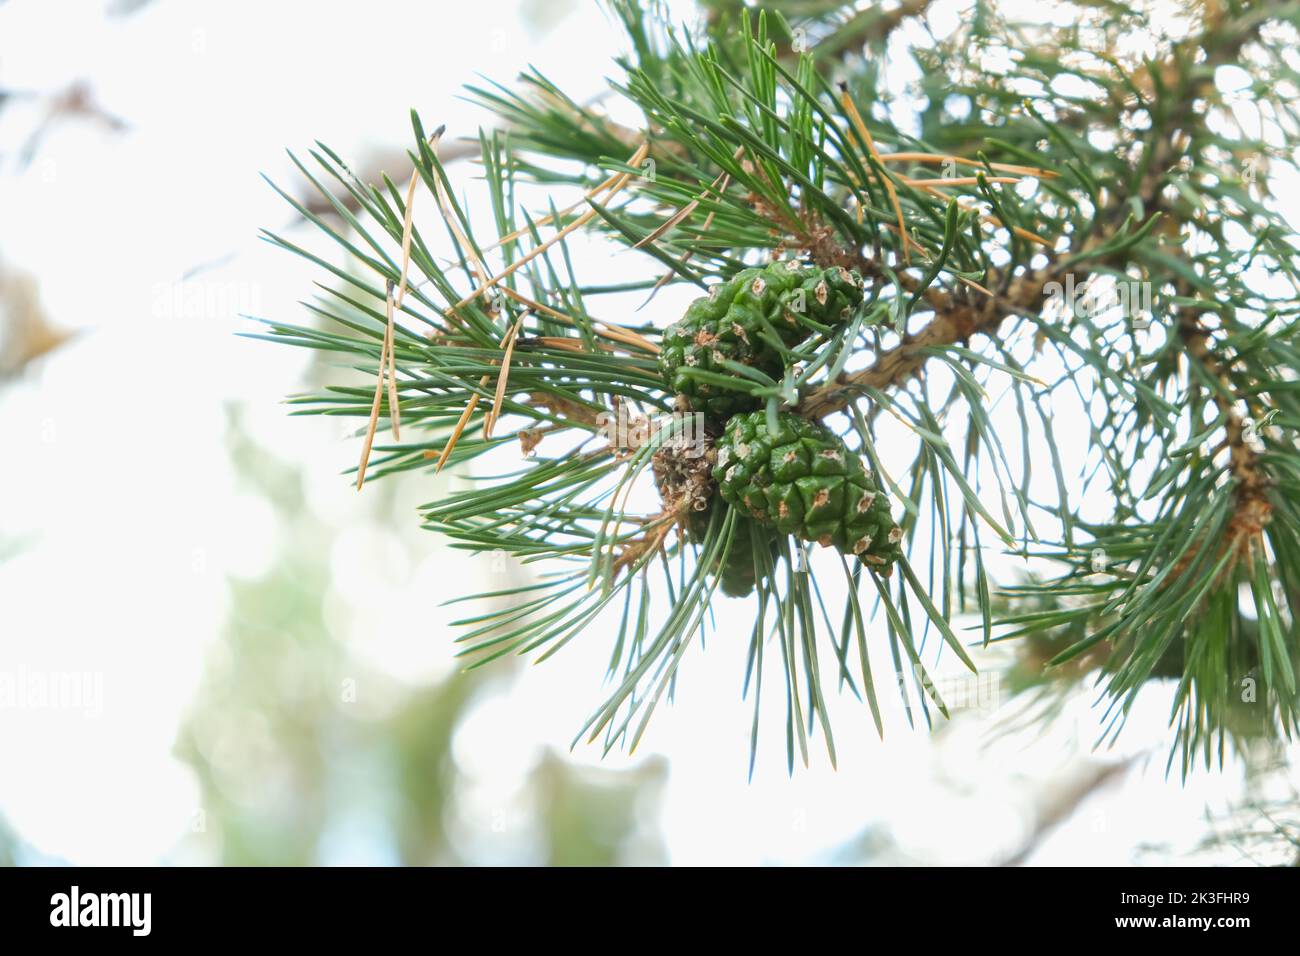 A young pine cone growing on a twig. Pine cone close-up. A green bump. Stock Photo